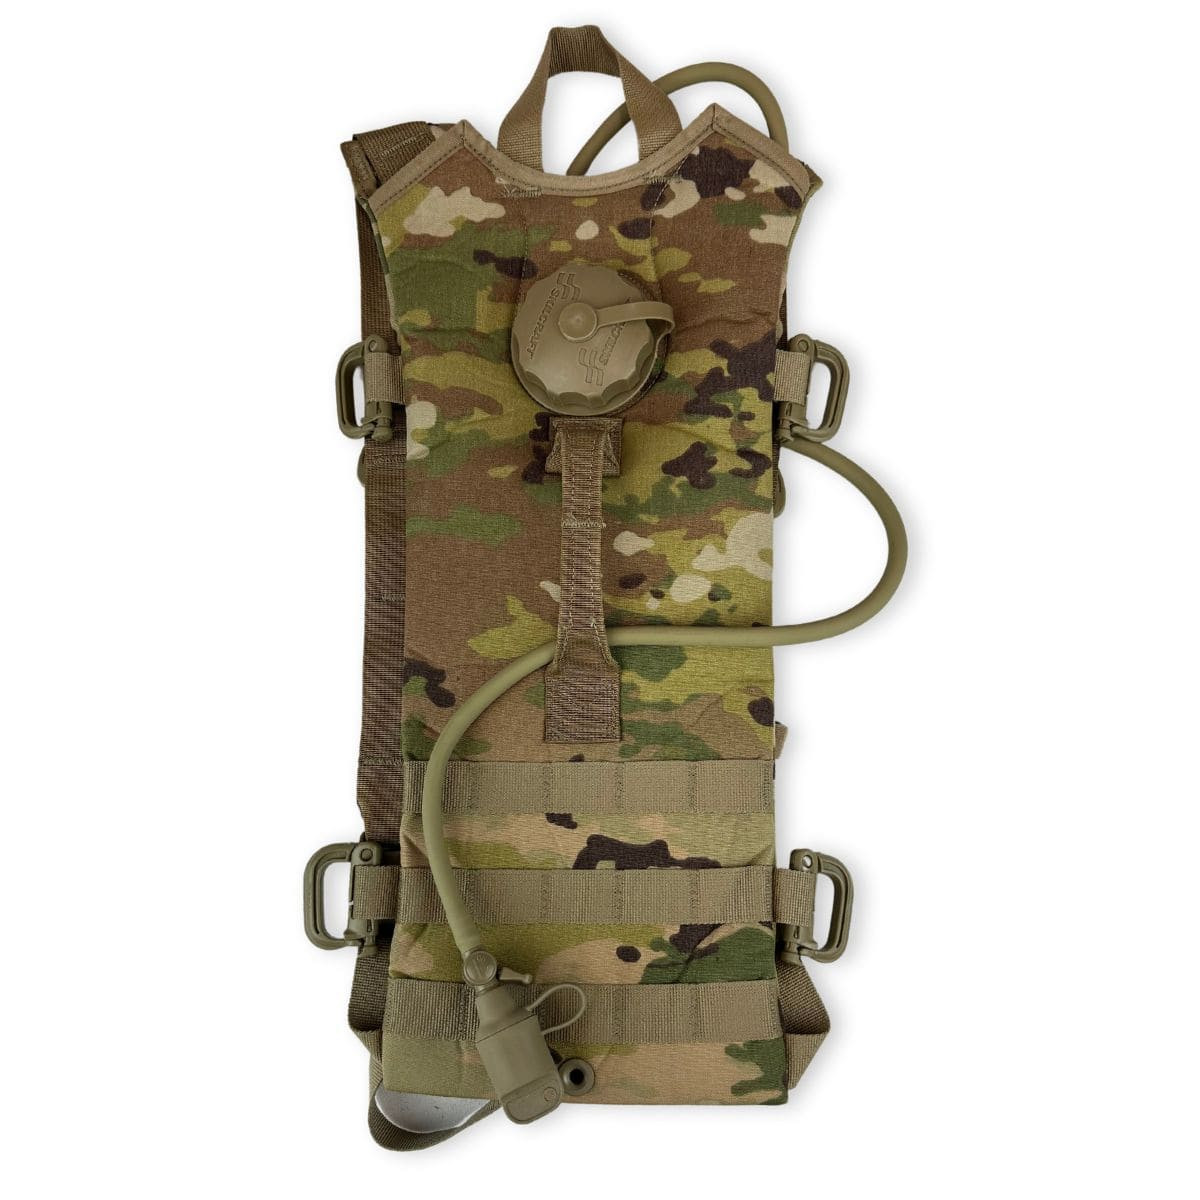 Image of U.S. Issue Multicam Hydration Pack, Used With Bladder